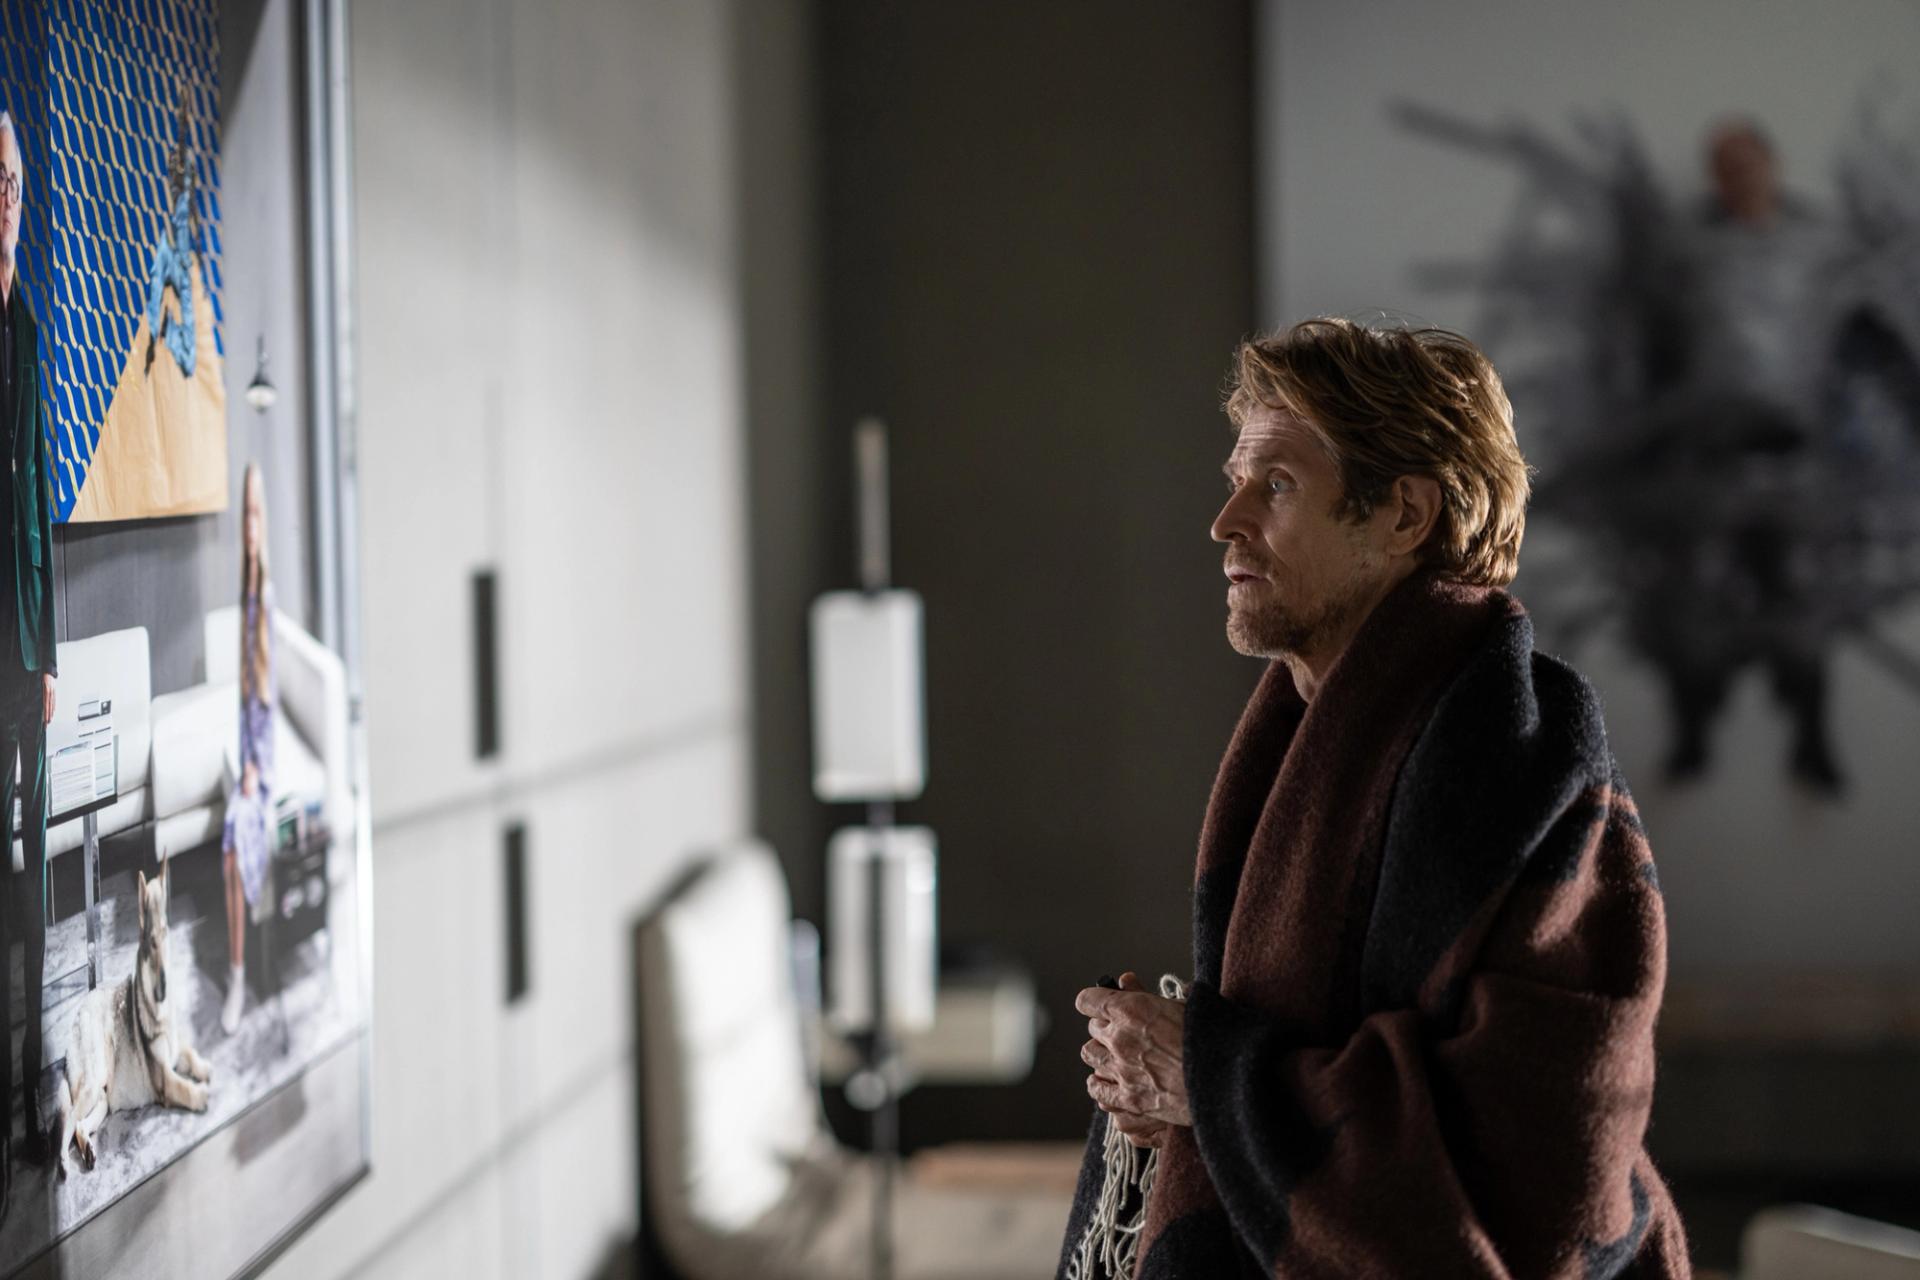 Sculpting in Time: WILLEM DAFOE on Being "Inside"